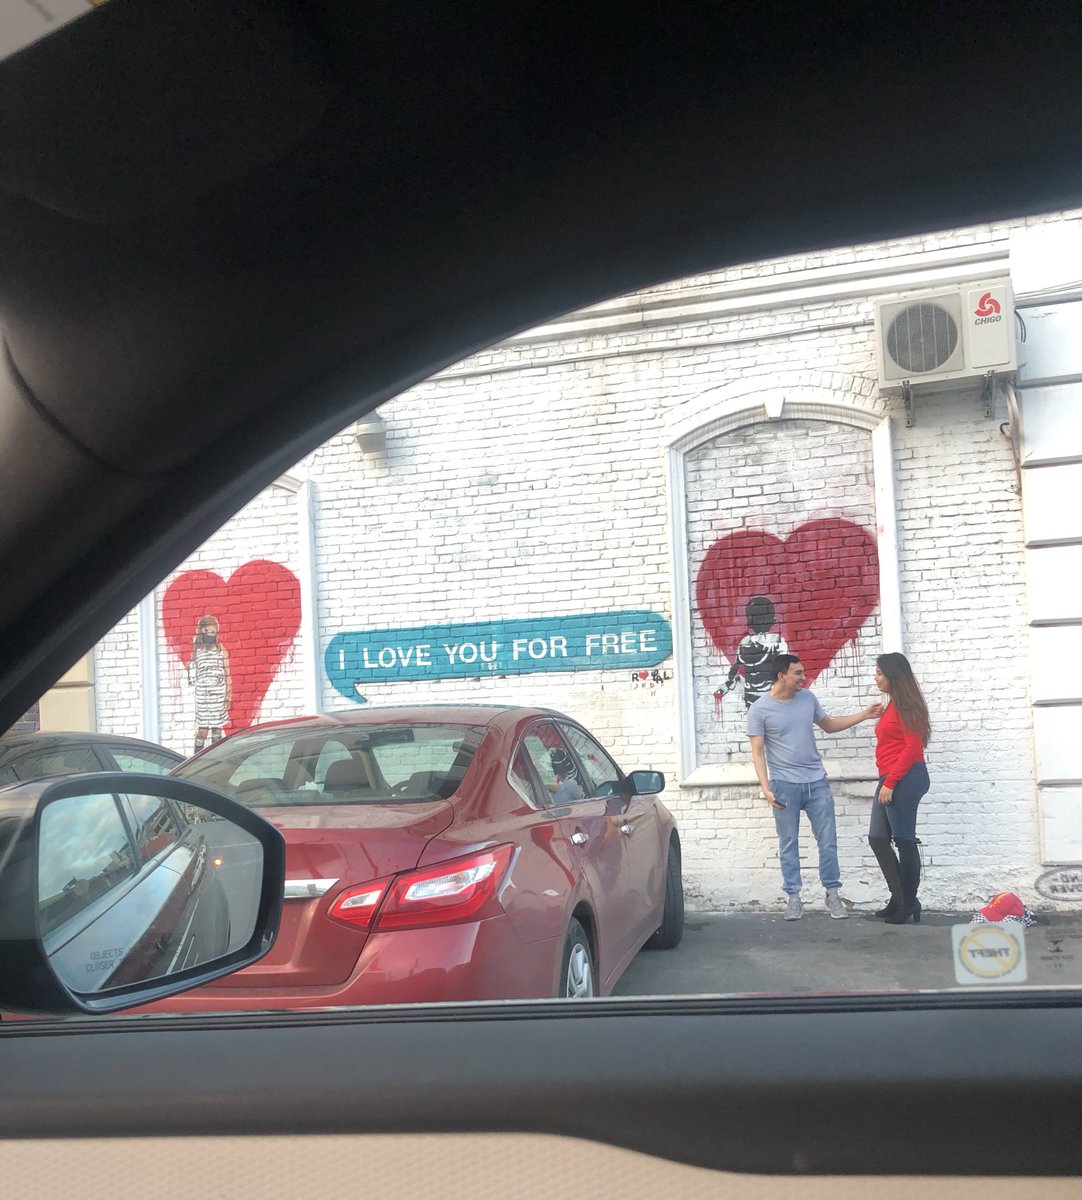 took this while looking for a parking spot yesterday... love ???? https://t.co/pBOkG28y0N